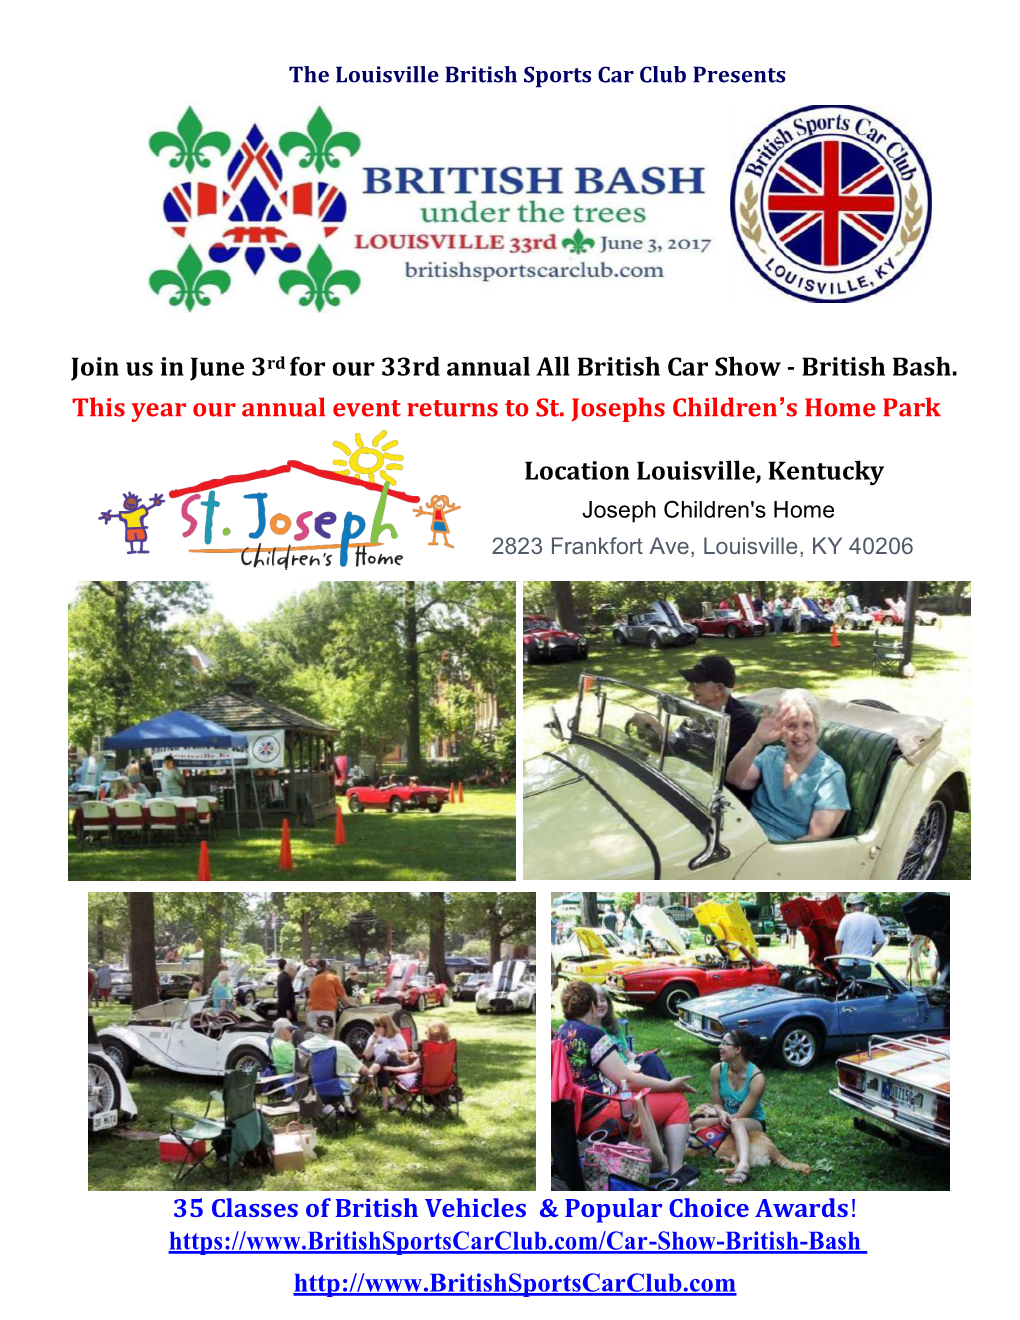 British Bash. This Year Our Annual Event Returns to St. Josephs Children’S Home Park